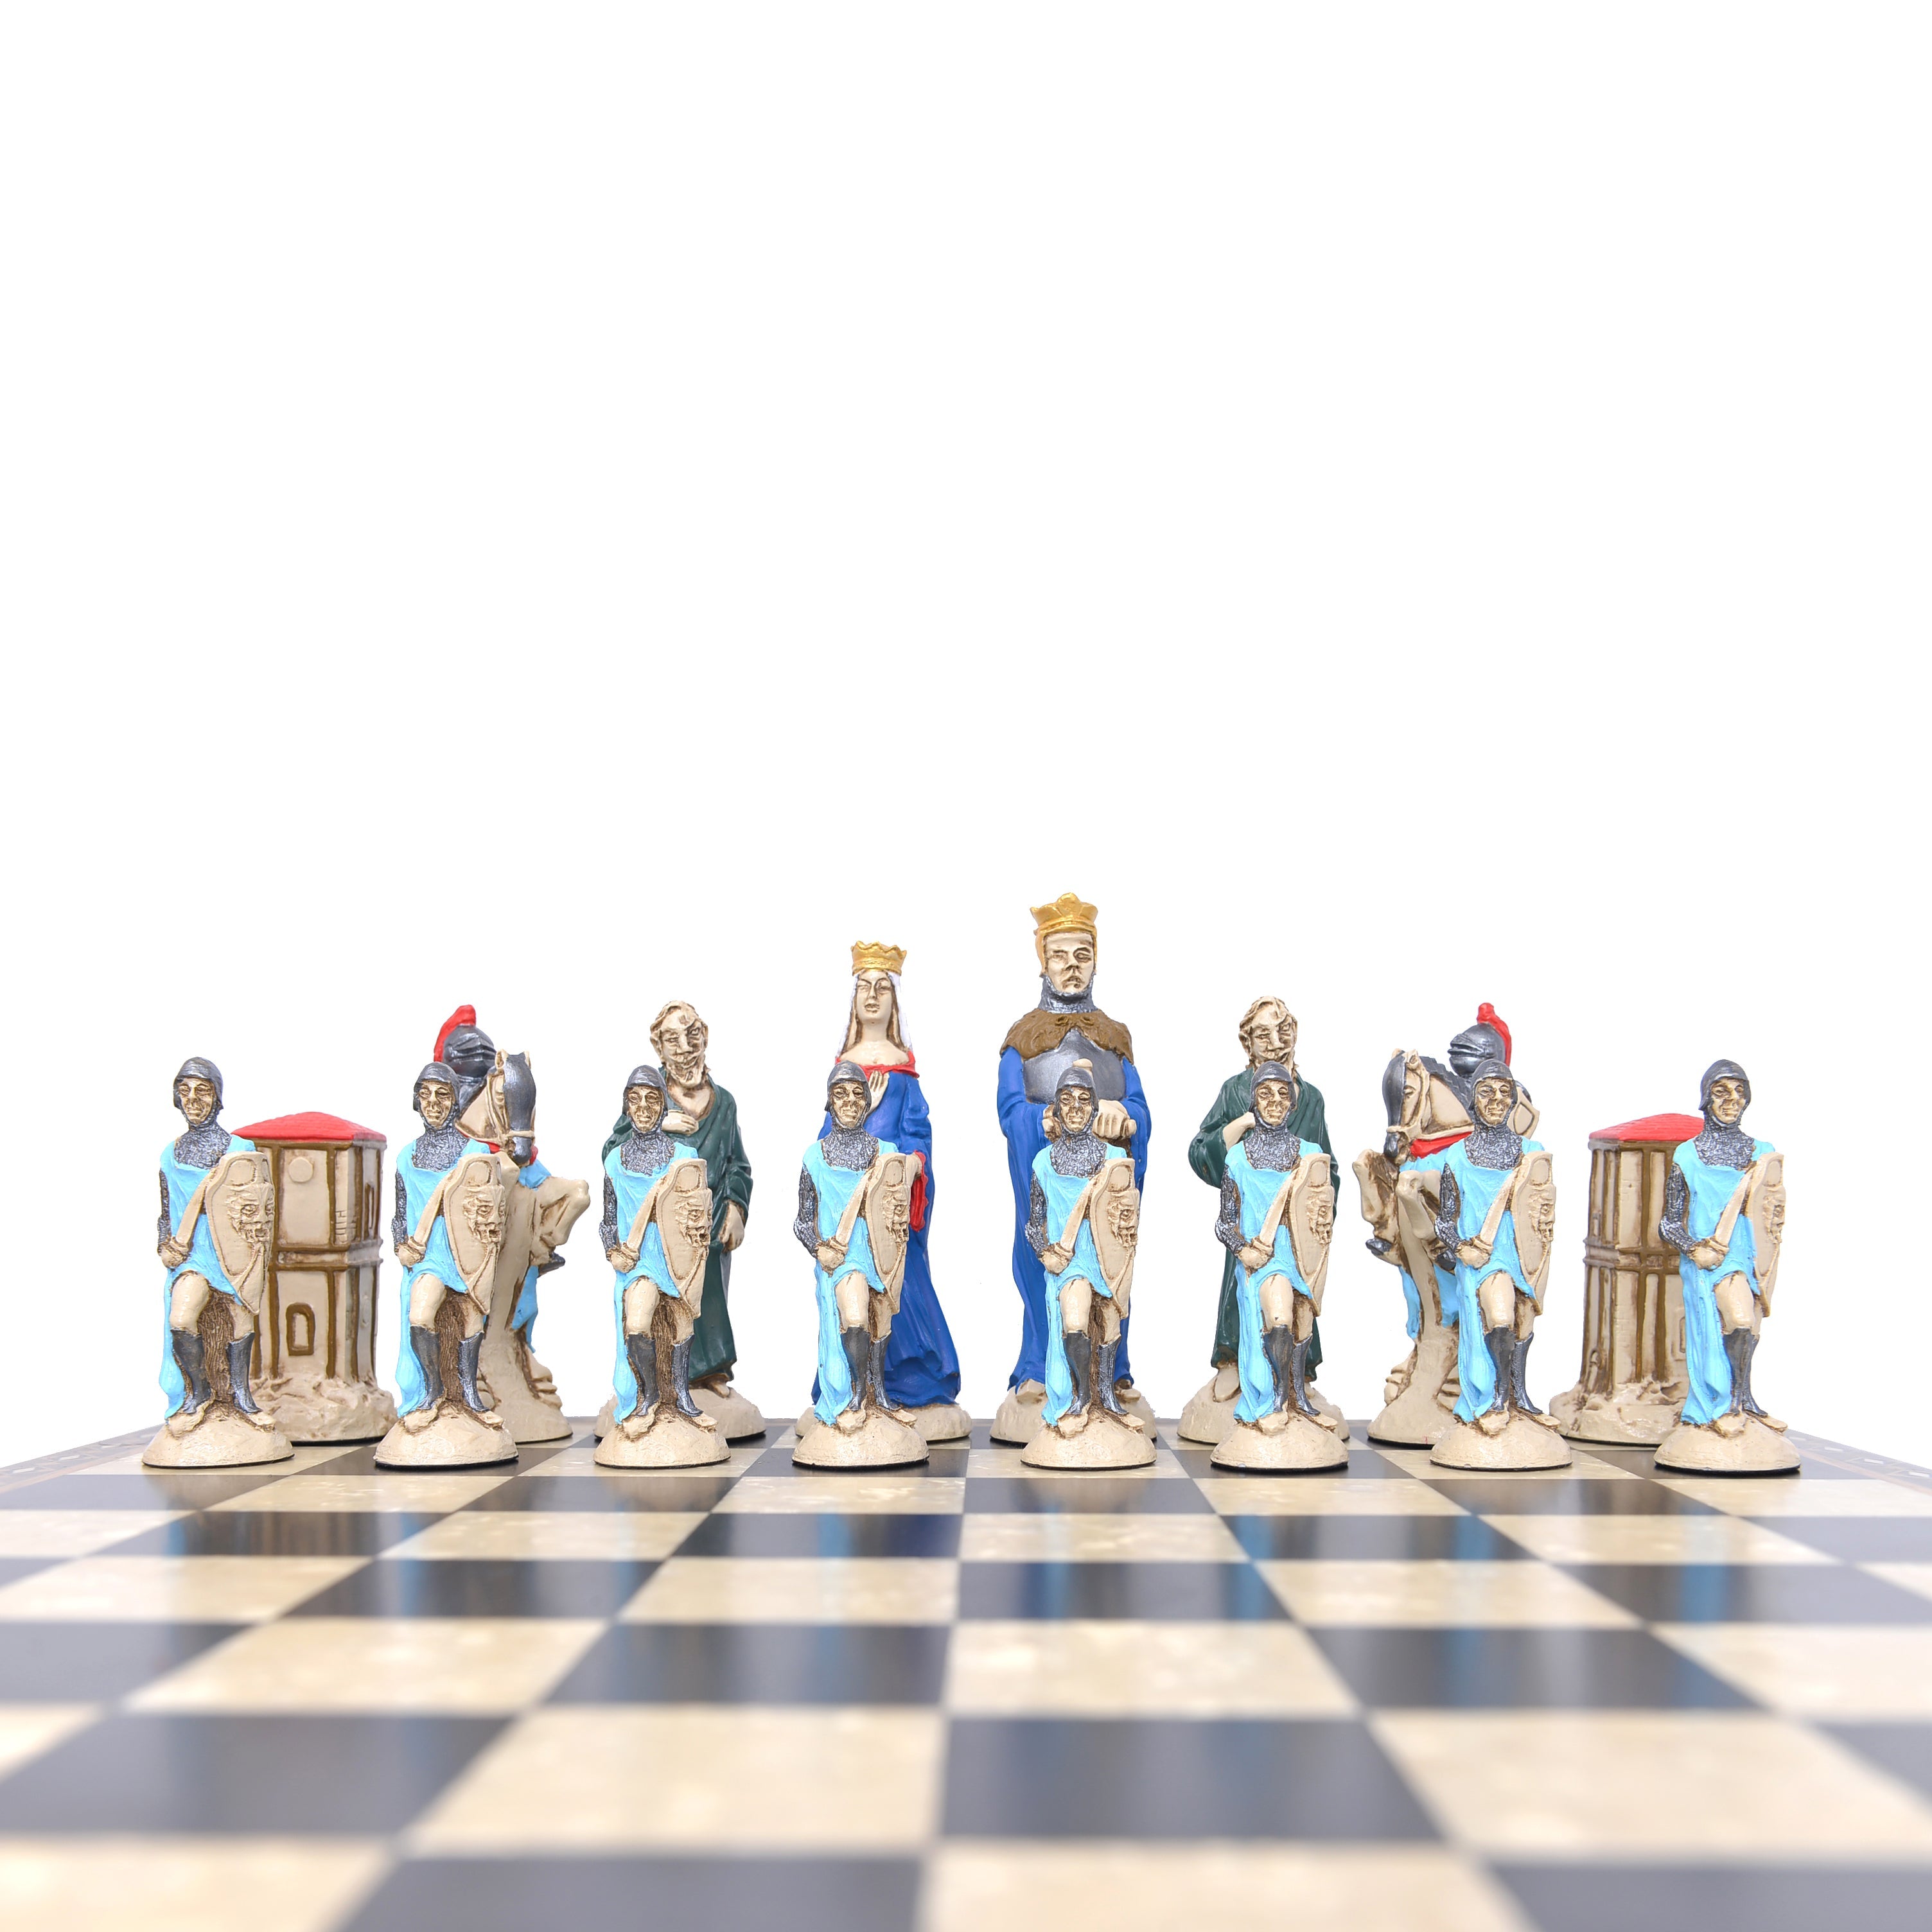 King Arthur & Camelot - Hand Painted Chess Set